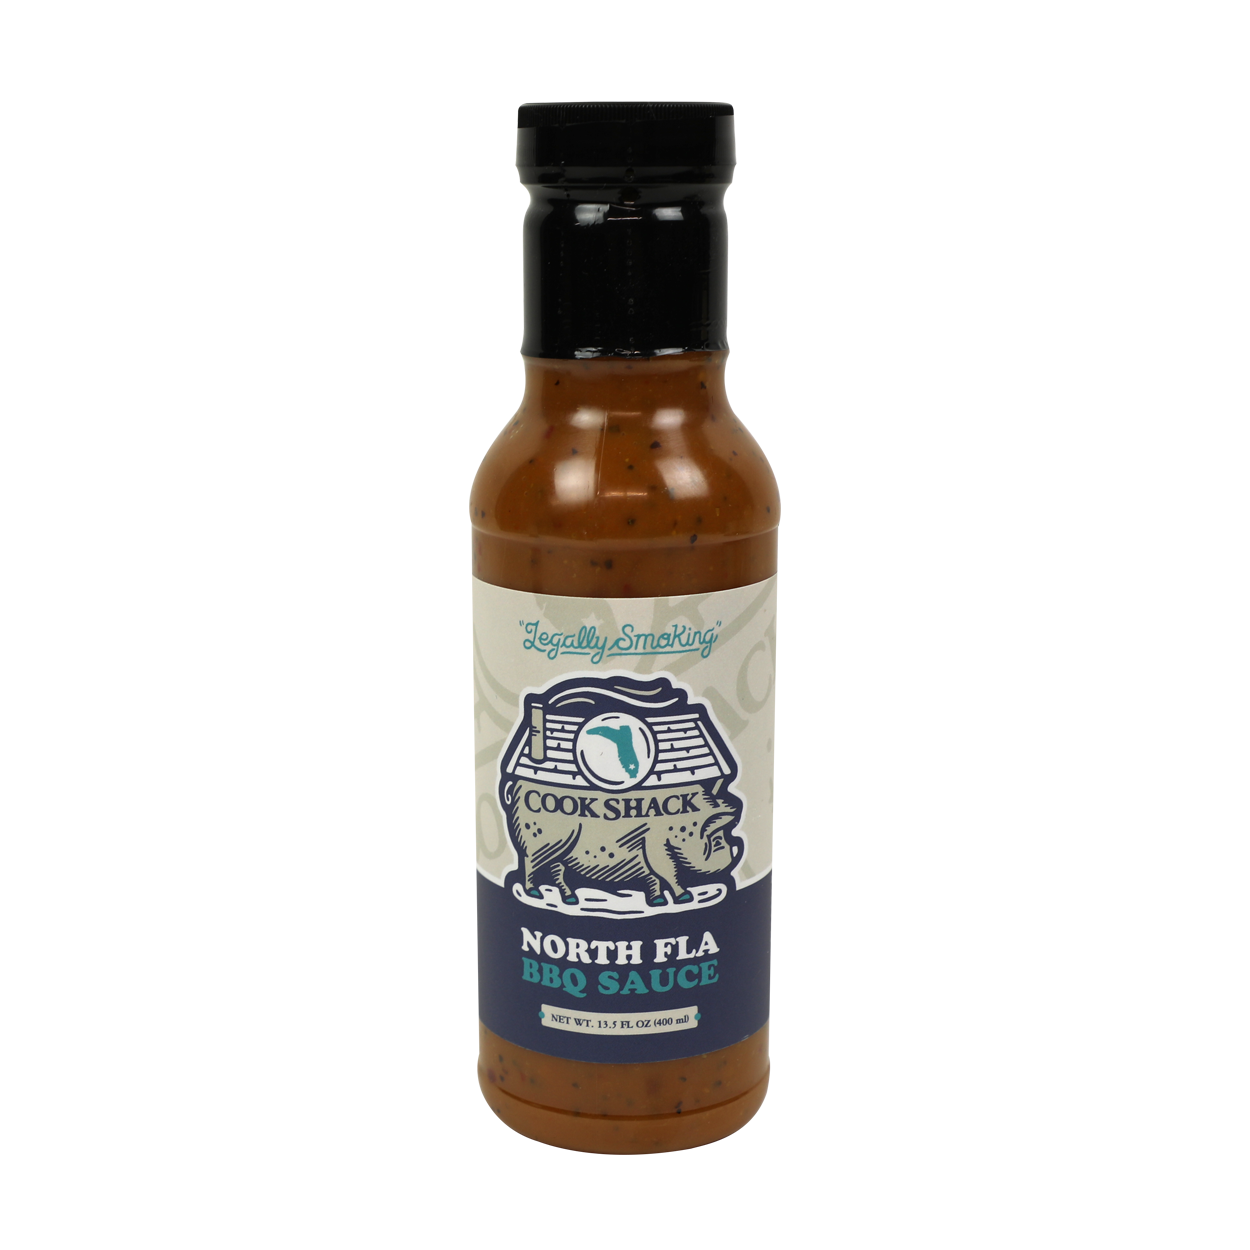 COOK SHACK SAUCES